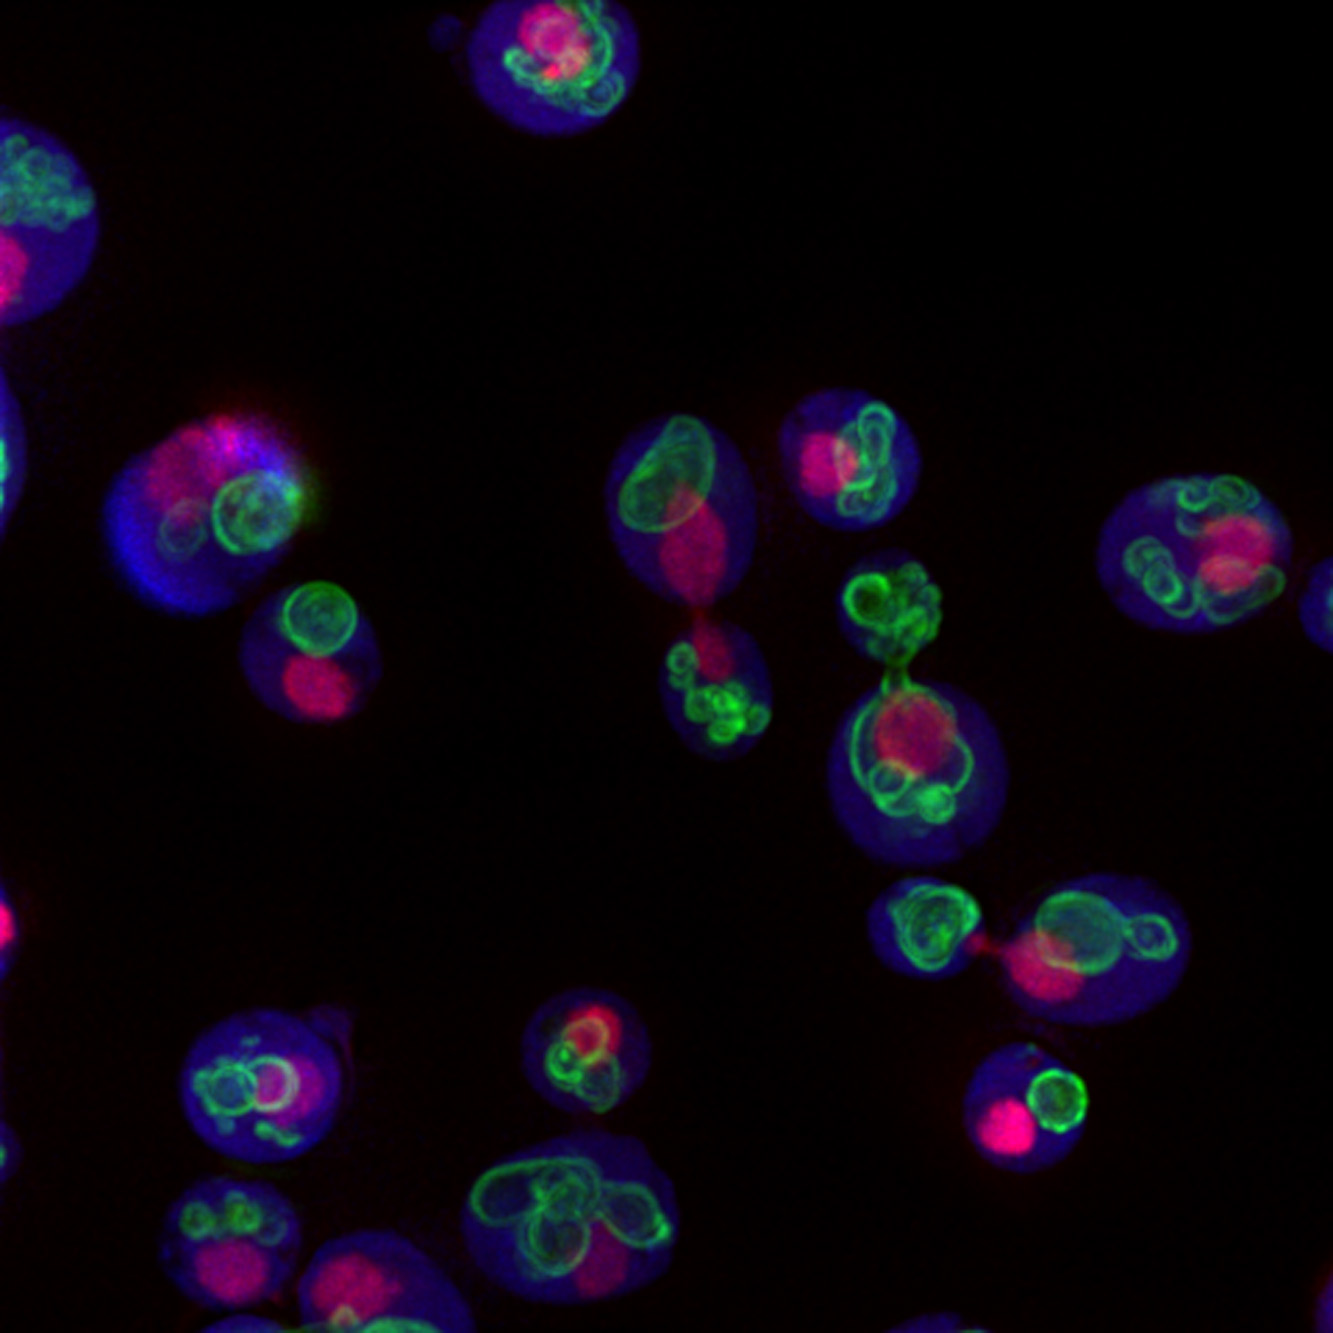 Yeast cells (purple) with DNA-containing nuclei (pink) and a protein (green) that resides in the cell’s waste compartment or vacuole.